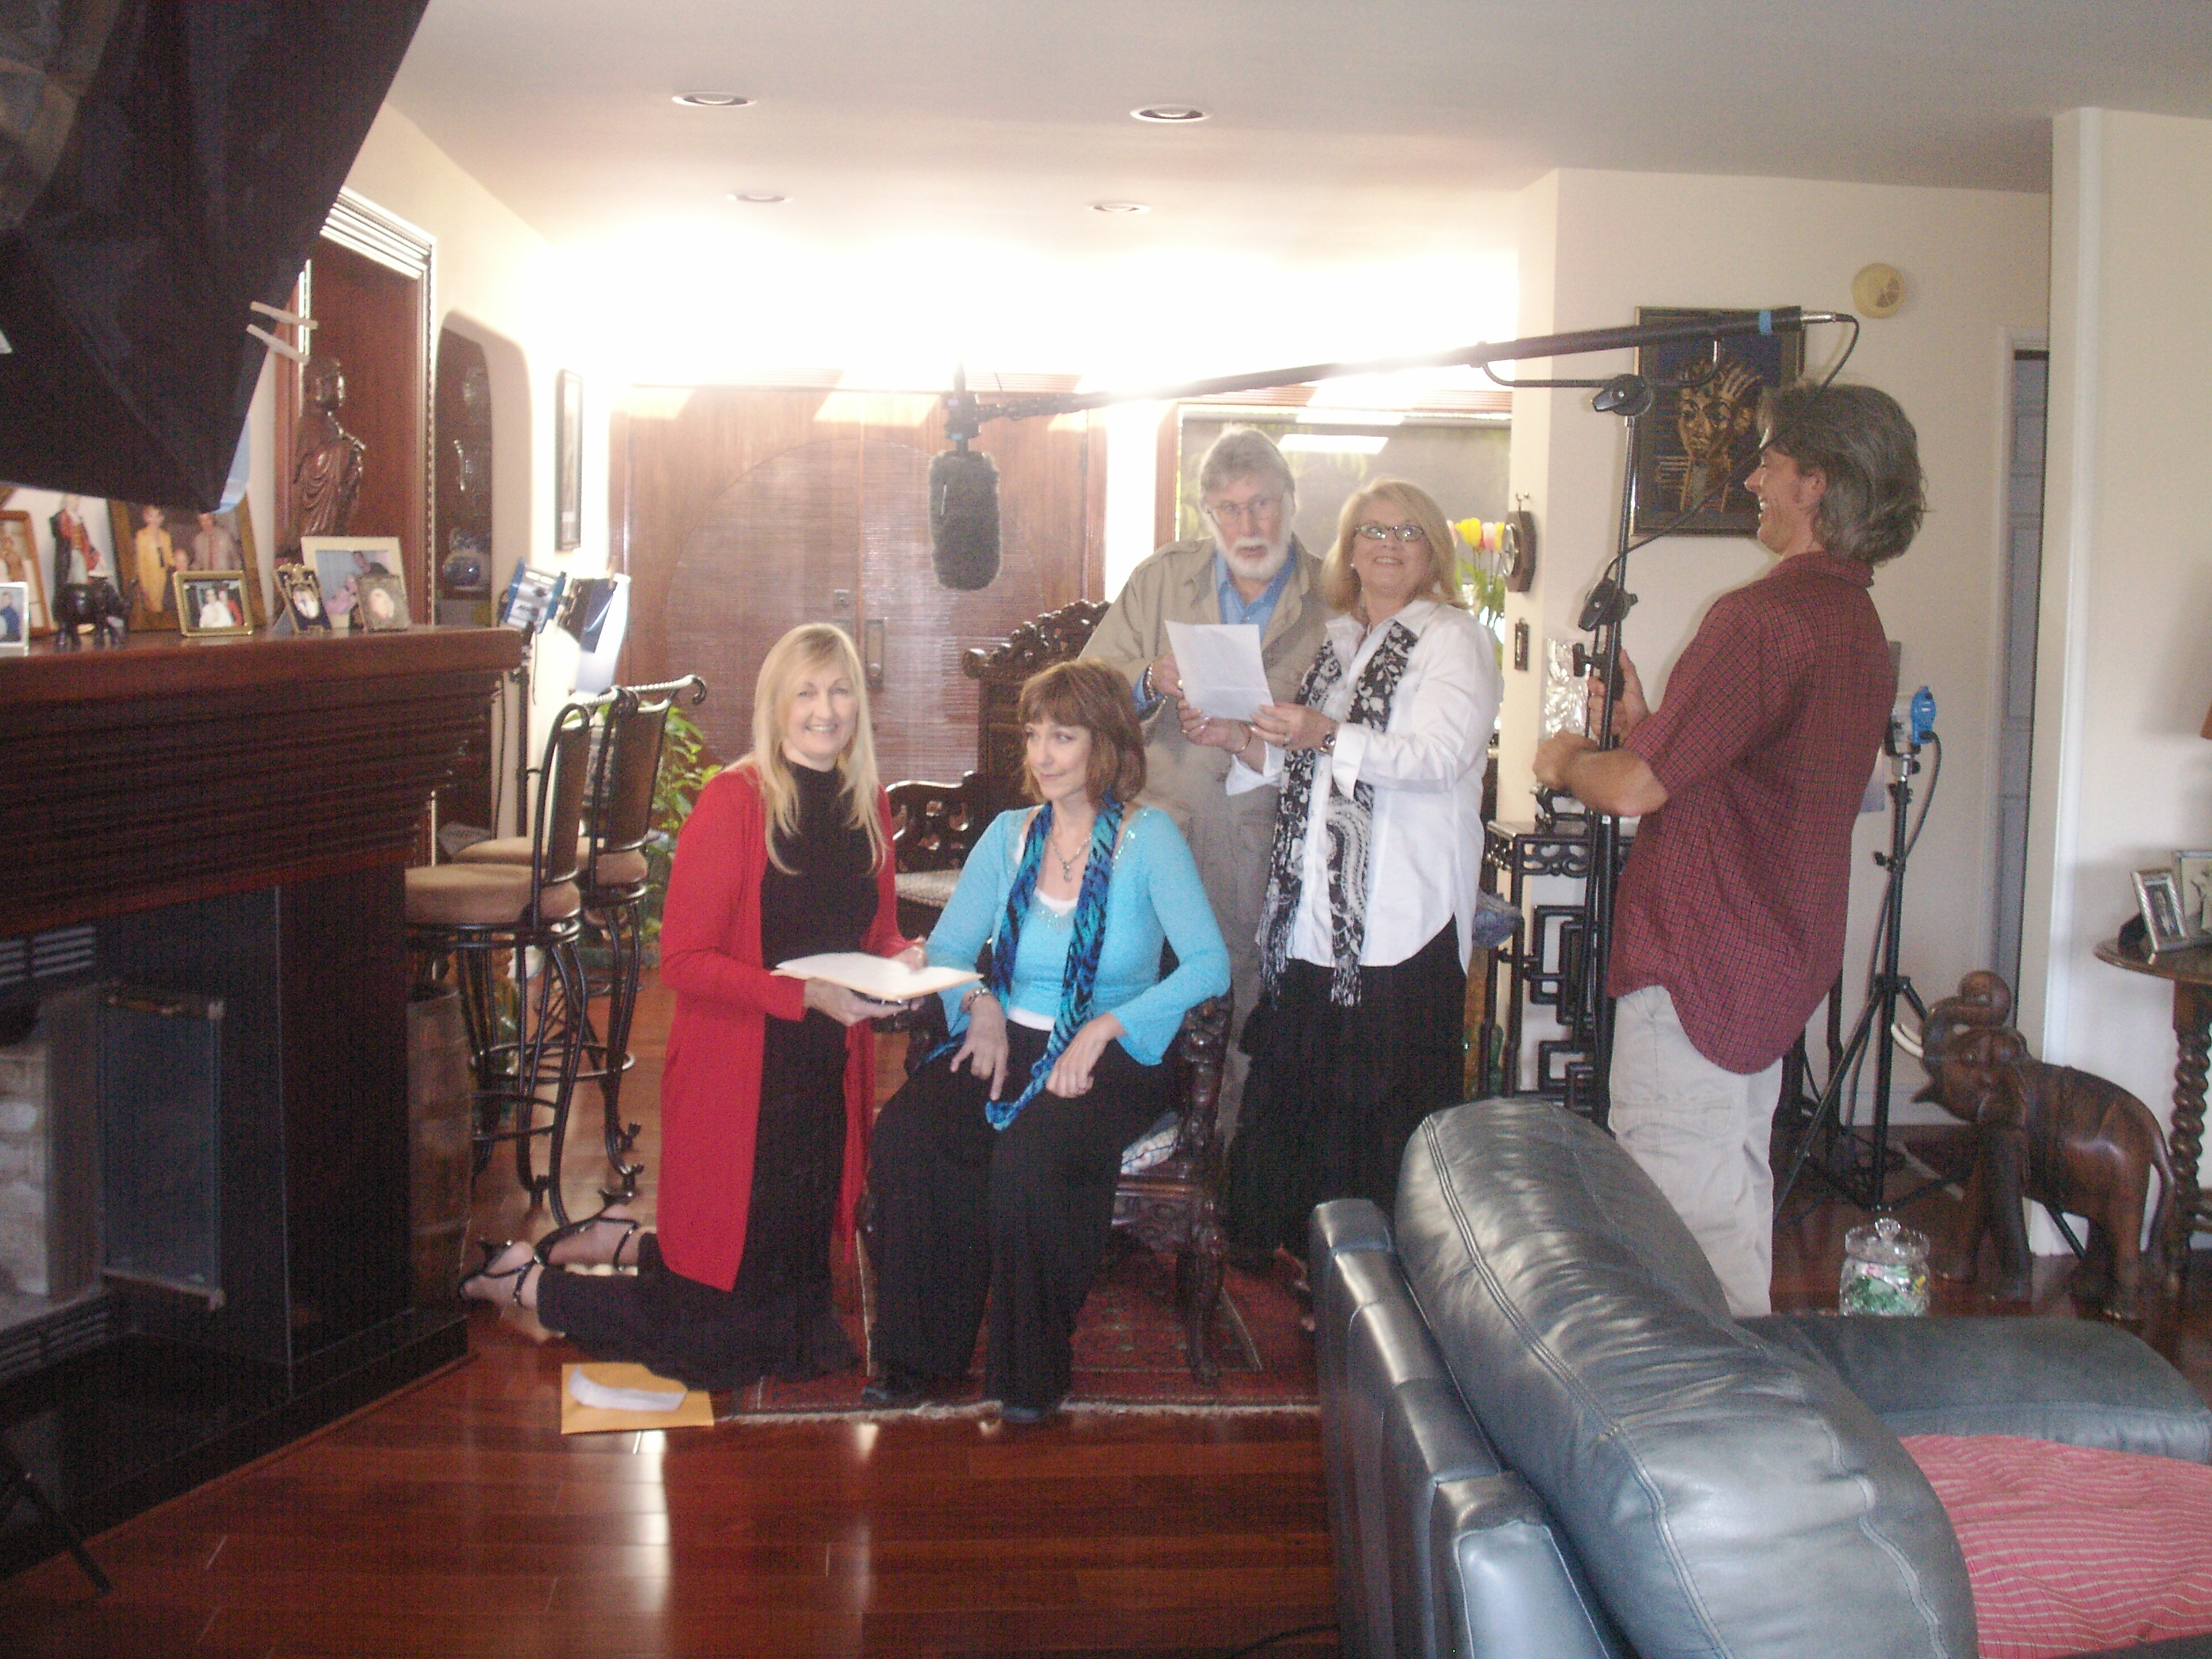 Karen Knotts (daughter of Don Knotts), Bob Mills, Edie Hand, and Martha Bolton on set of an upcoming project created and produced by Martha and Edie